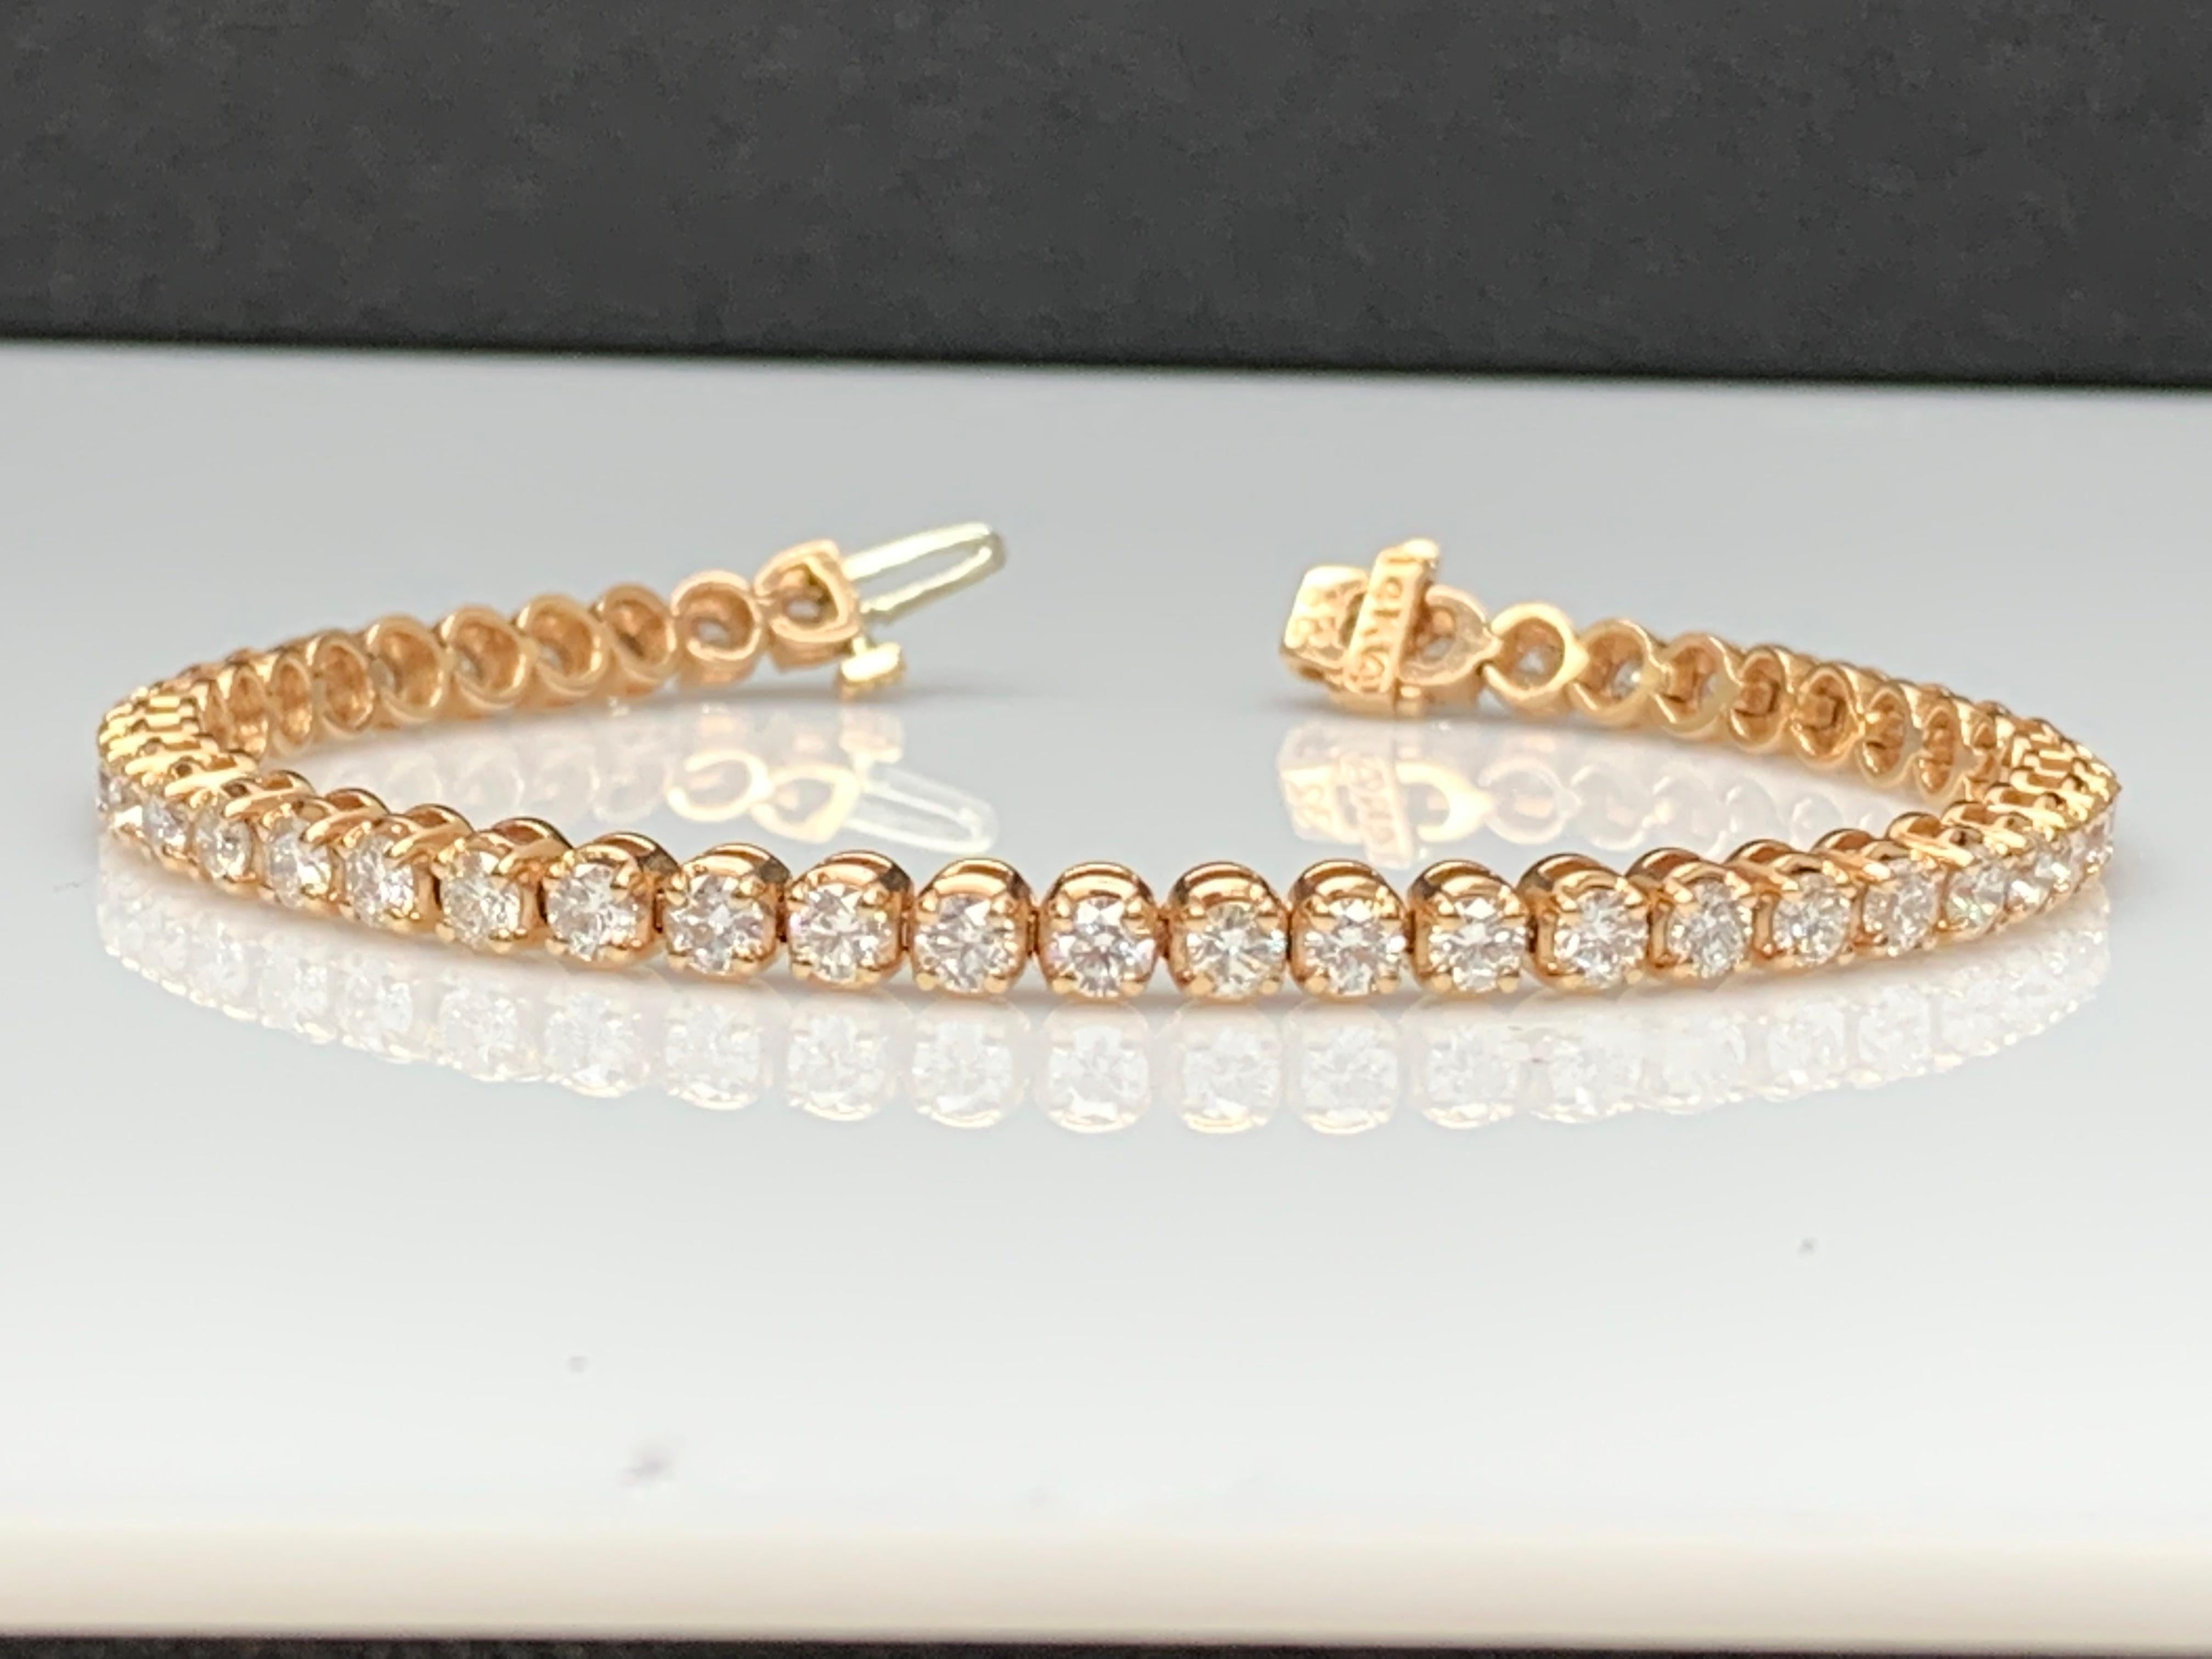 A classic tennis bracelet style showcasing a row of round brilliant diamonds, set in a polished 14k rose gold mounting. 57 Diamonds weigh 3.02 carats total and are approximately GH color, SI1 clarity.

Style available in different price ranges.